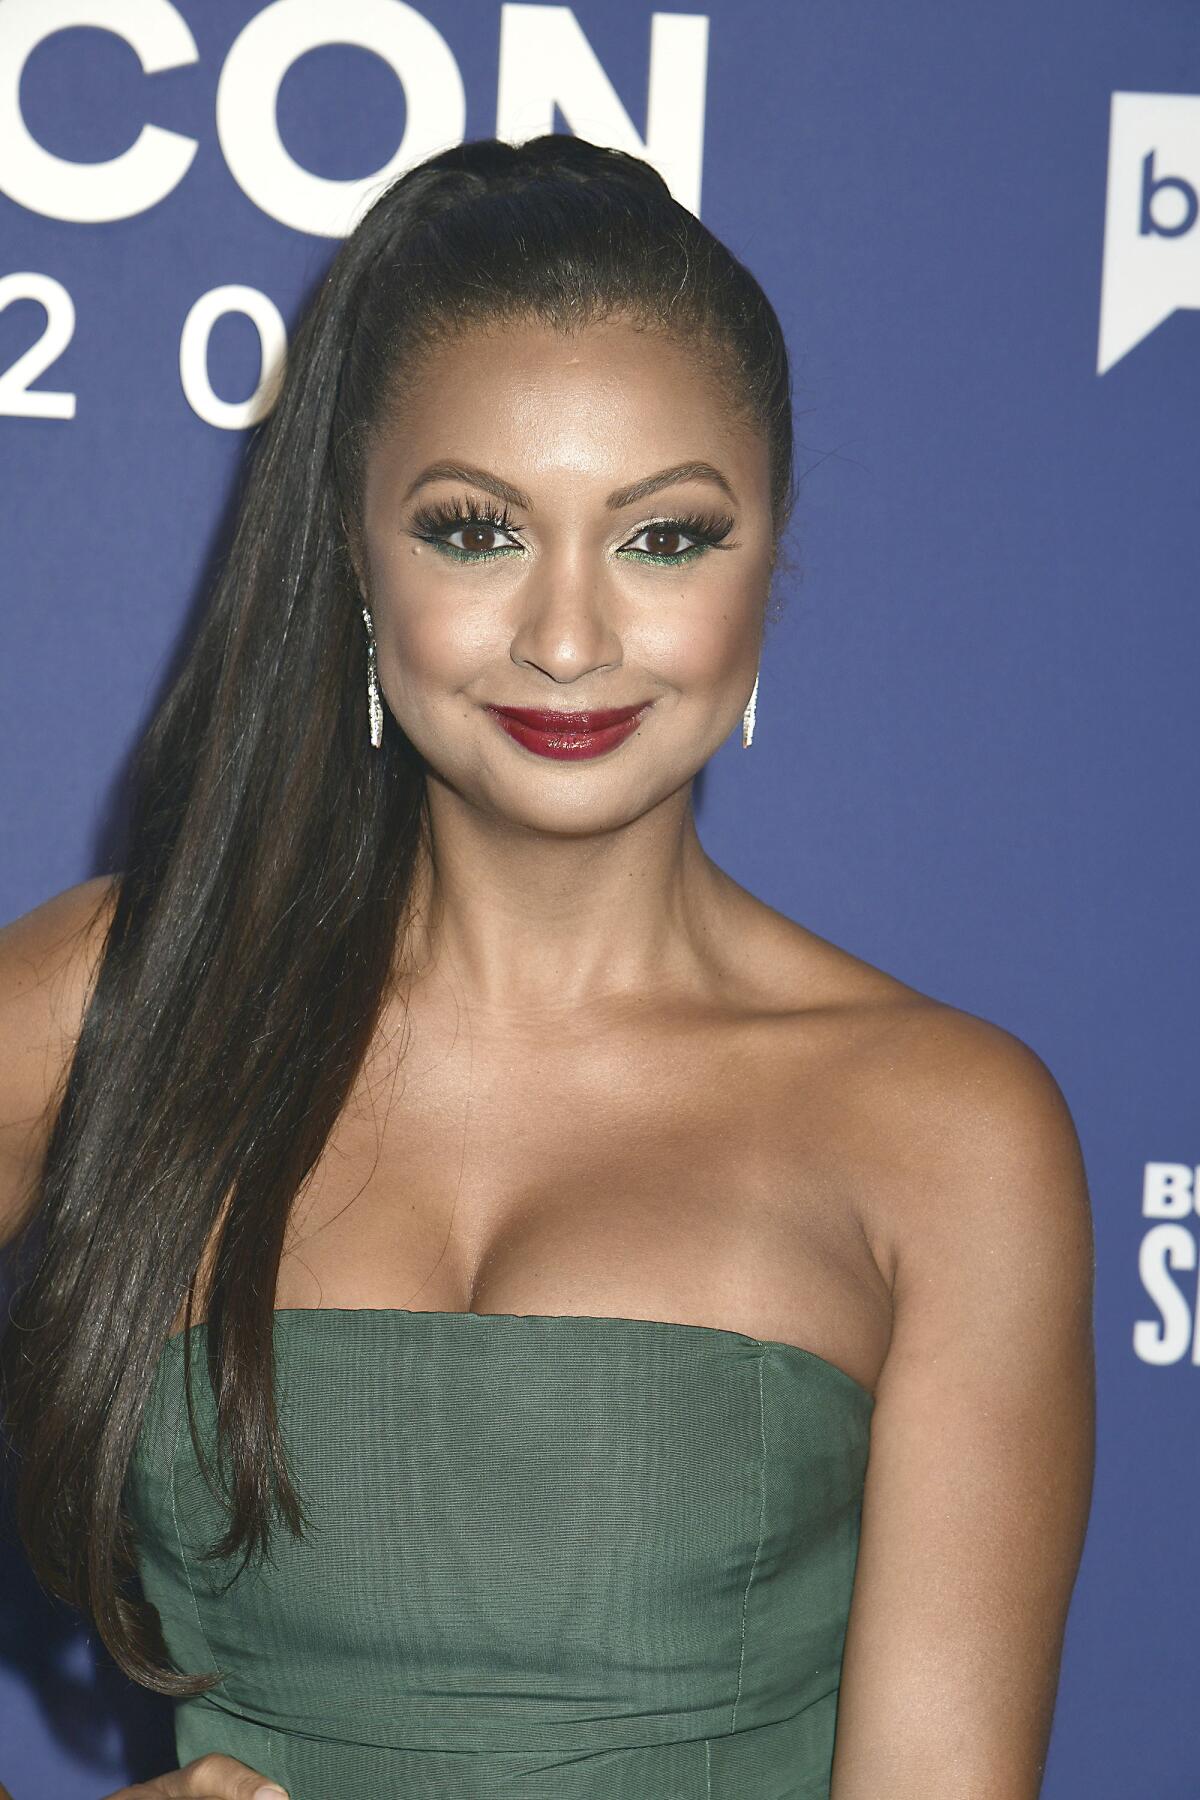 Eboni K. Williams wears a strapless green gown and diamond earrings with a high ponytail